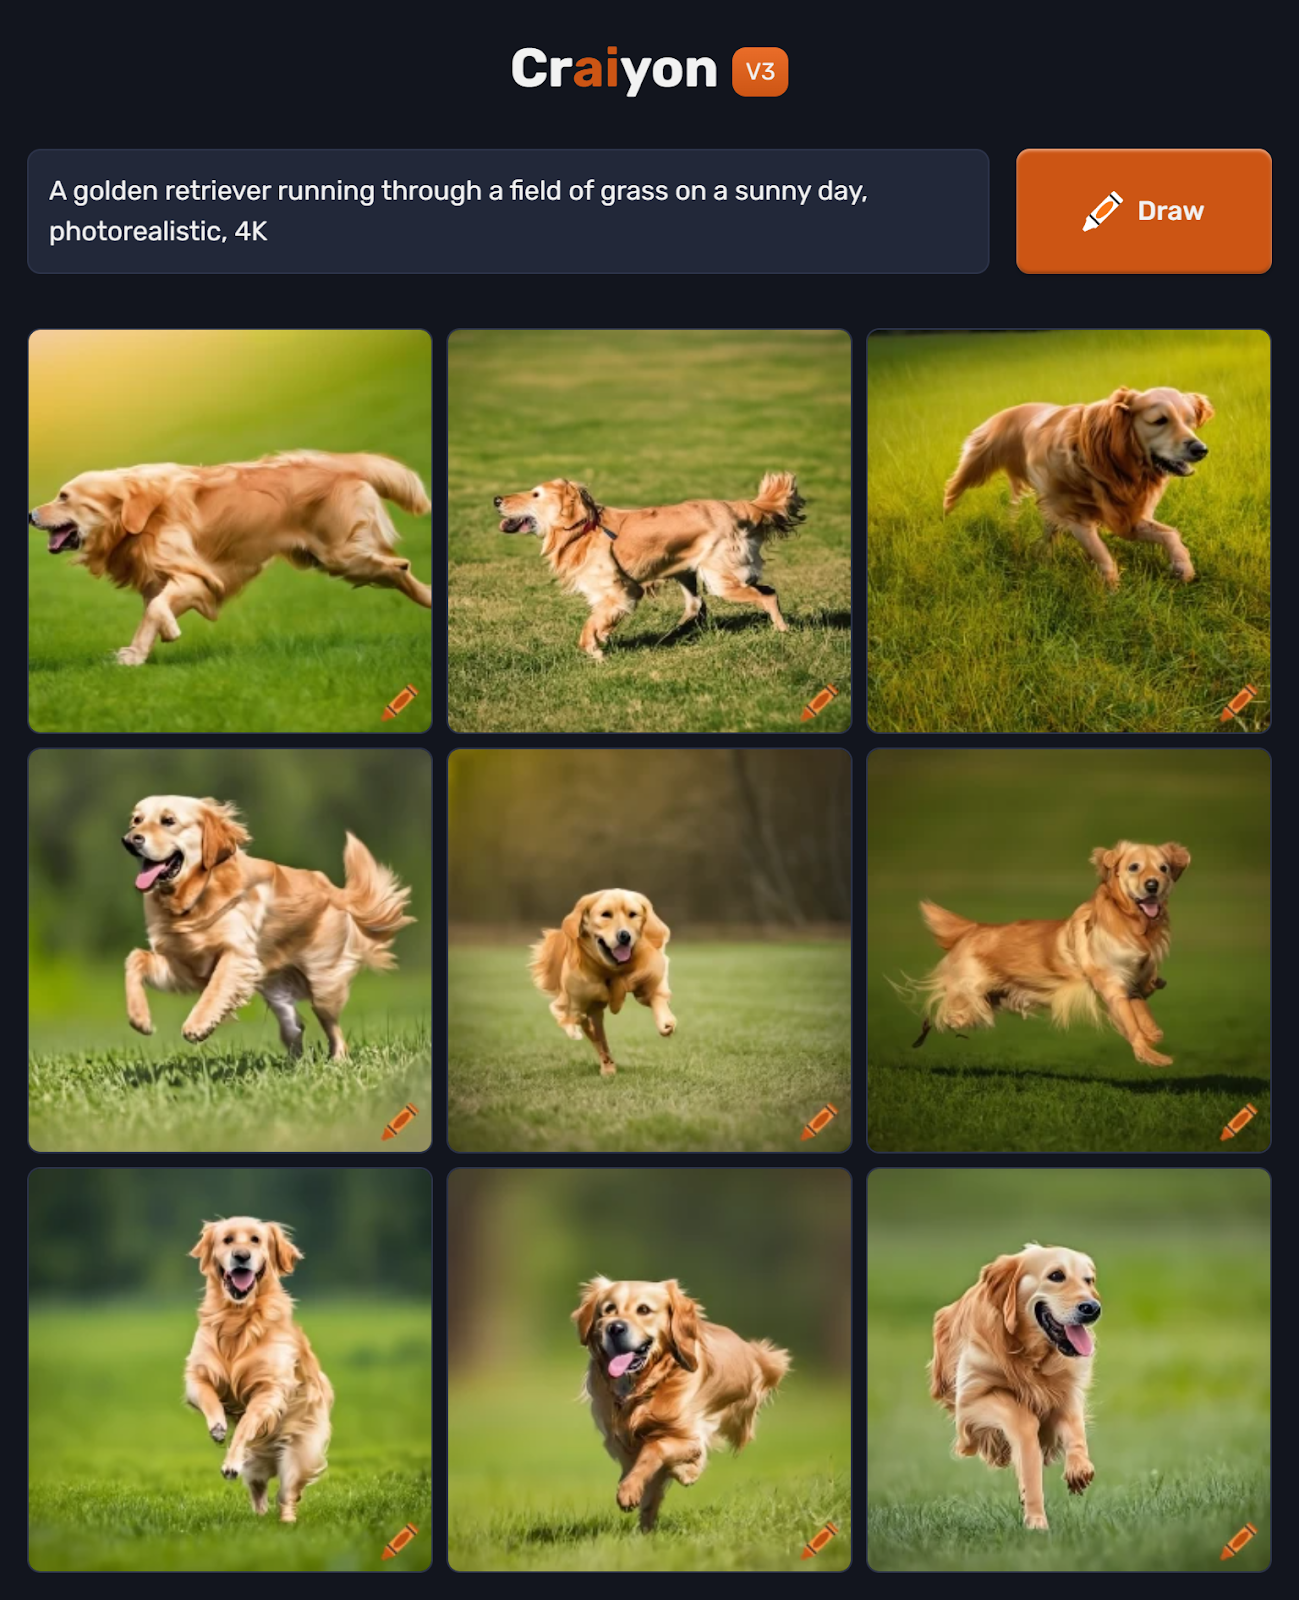 Nine images of a Golden Retriever running through a field generated using Craiyon AI.